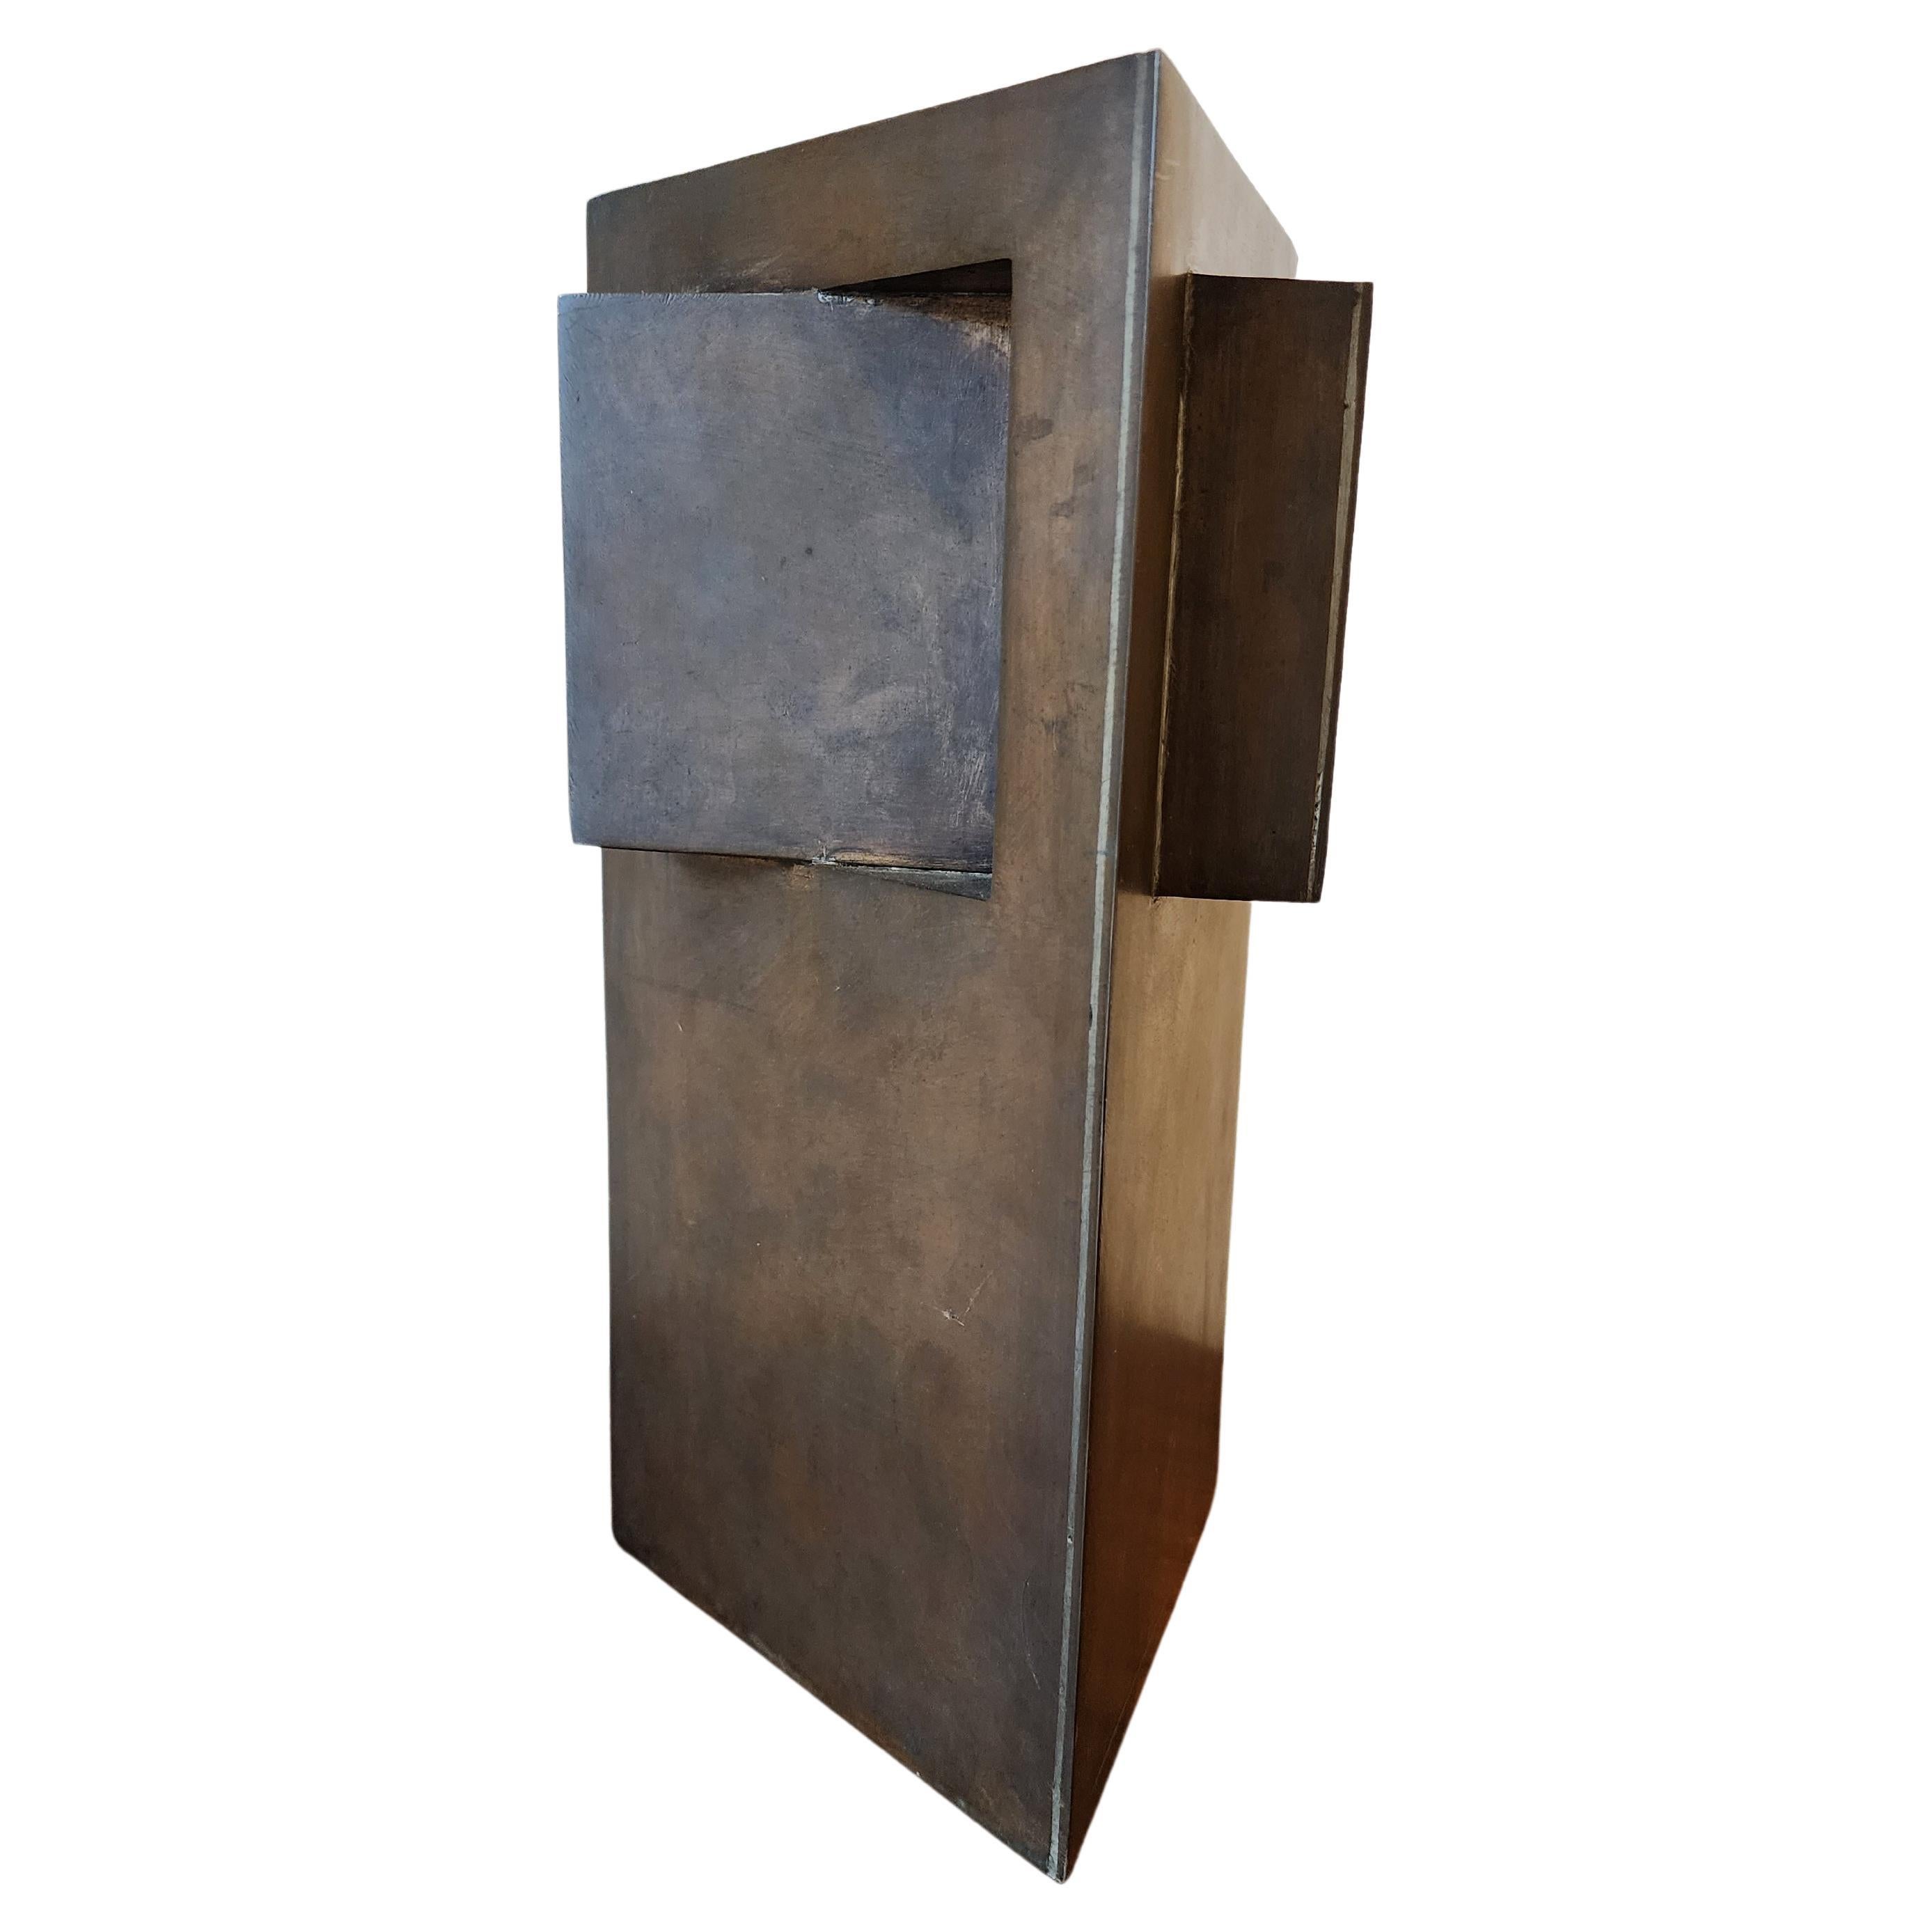 A beautiful and rarely seen bronze sculpture by American artist Gerald DiGiusto. Signed dated and titled on the underside.
Gerald Digiusto was born June 30, 1929 in New York City, the son of immigrant Italian and Jewish parents. He grew up in